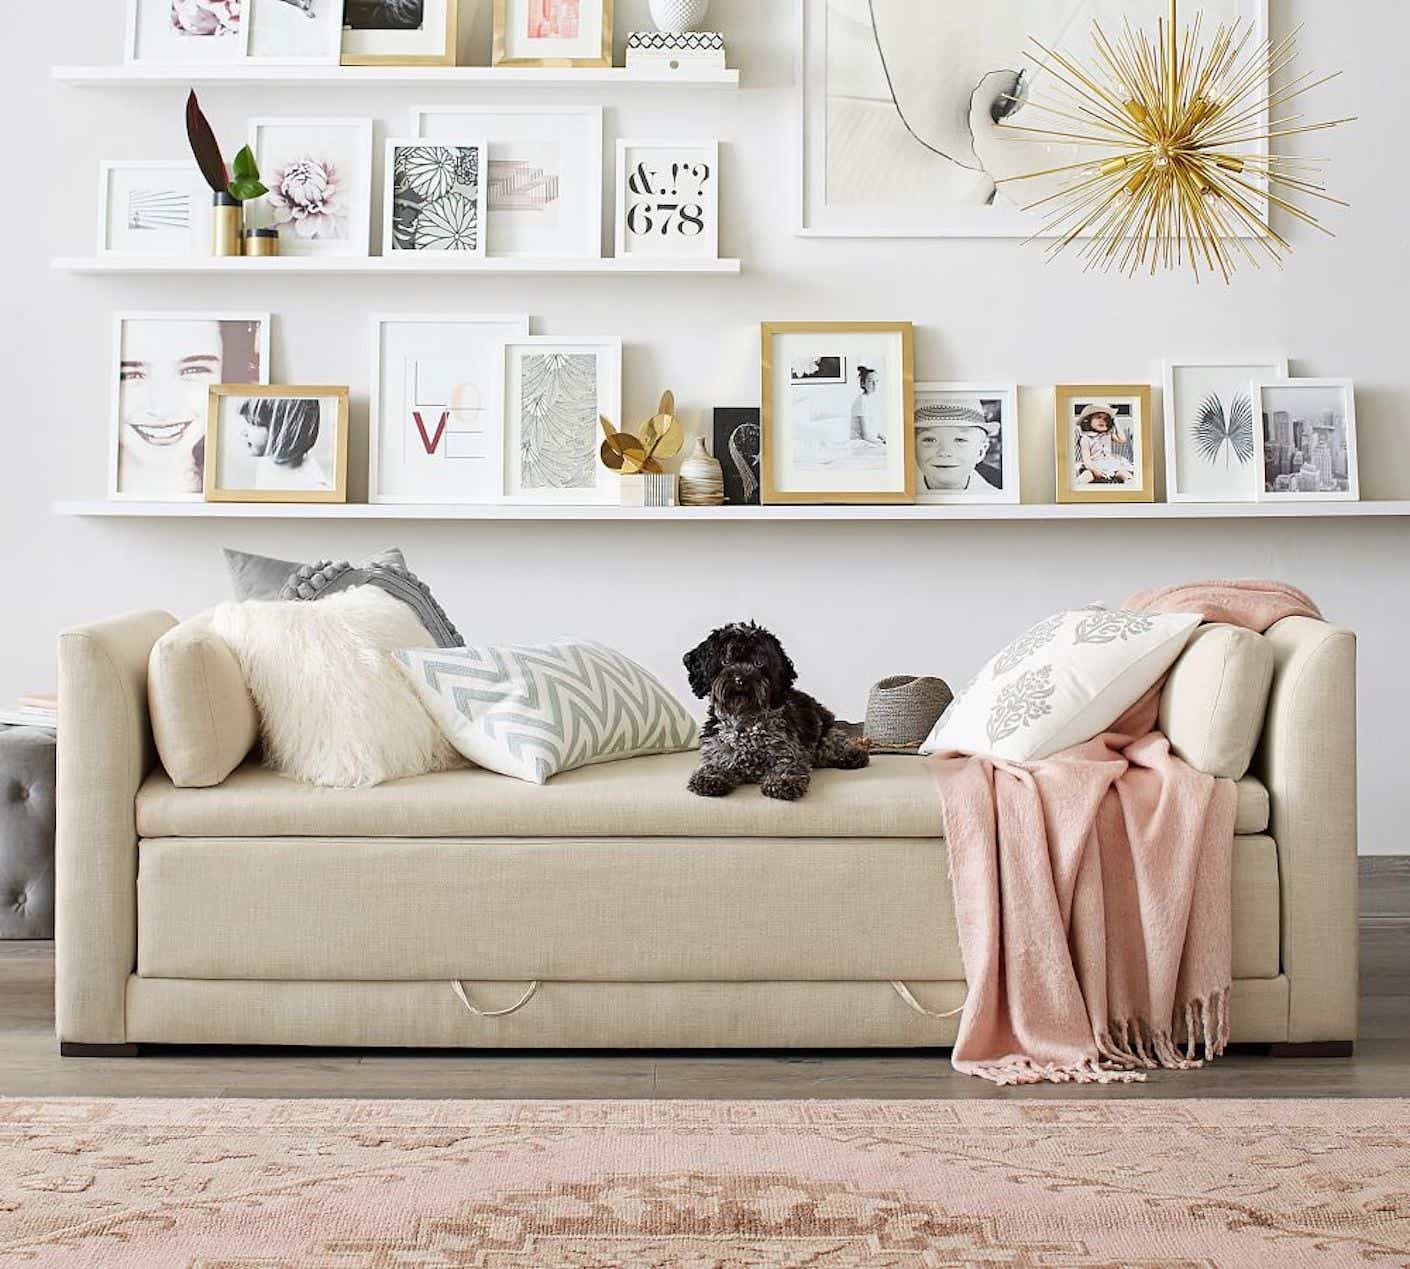 A beige daybed that converts into a sleeping space is pictured in a bright, organized living room.